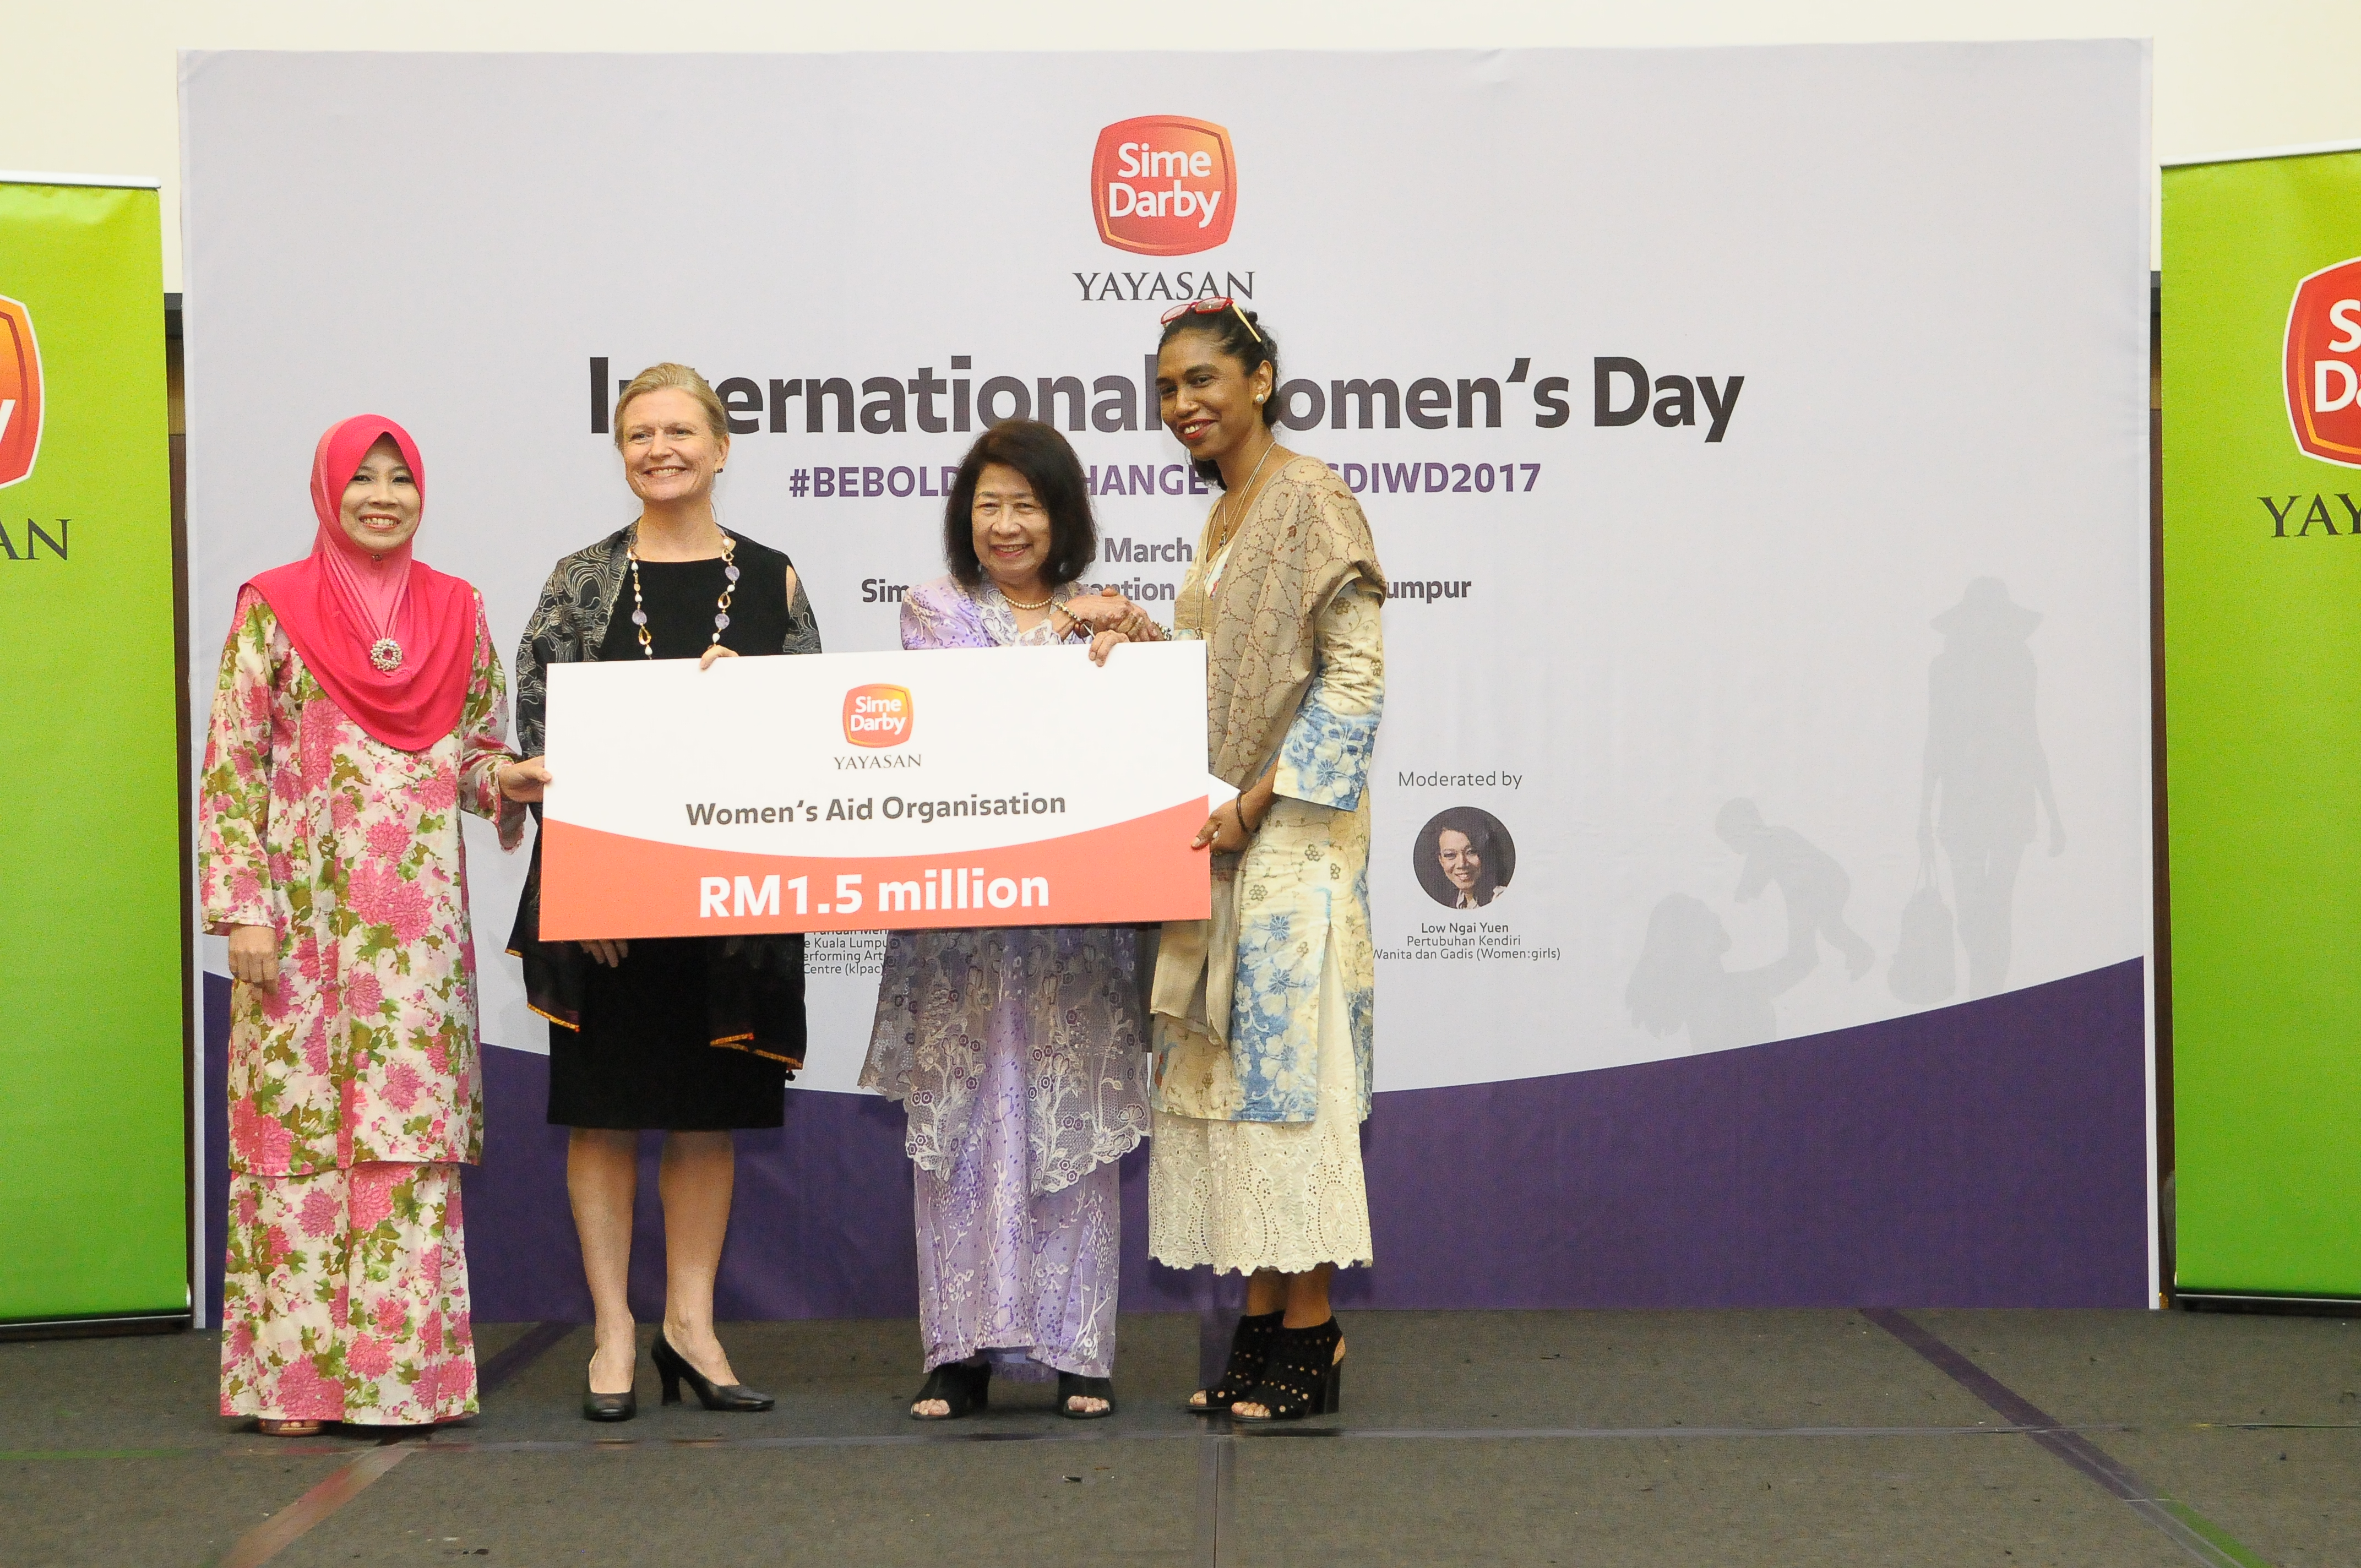 YSD Chief Executive Officer Puan Hajjah Yatela Zainal Abidin, YSD Governing Council Member Ms Caroline Christine Russell and YSD Governing Council Member YBhg. Datin Paduka Zaitoon Dato’ Othman hands over a mock cheque signifying YSD’s continued support of RM1.5 million to Women’s Aid Organisation (WAO) Executive Director Ms Sumitra Visvanathan. YSD’s support to WAO is for three years until December 2019.